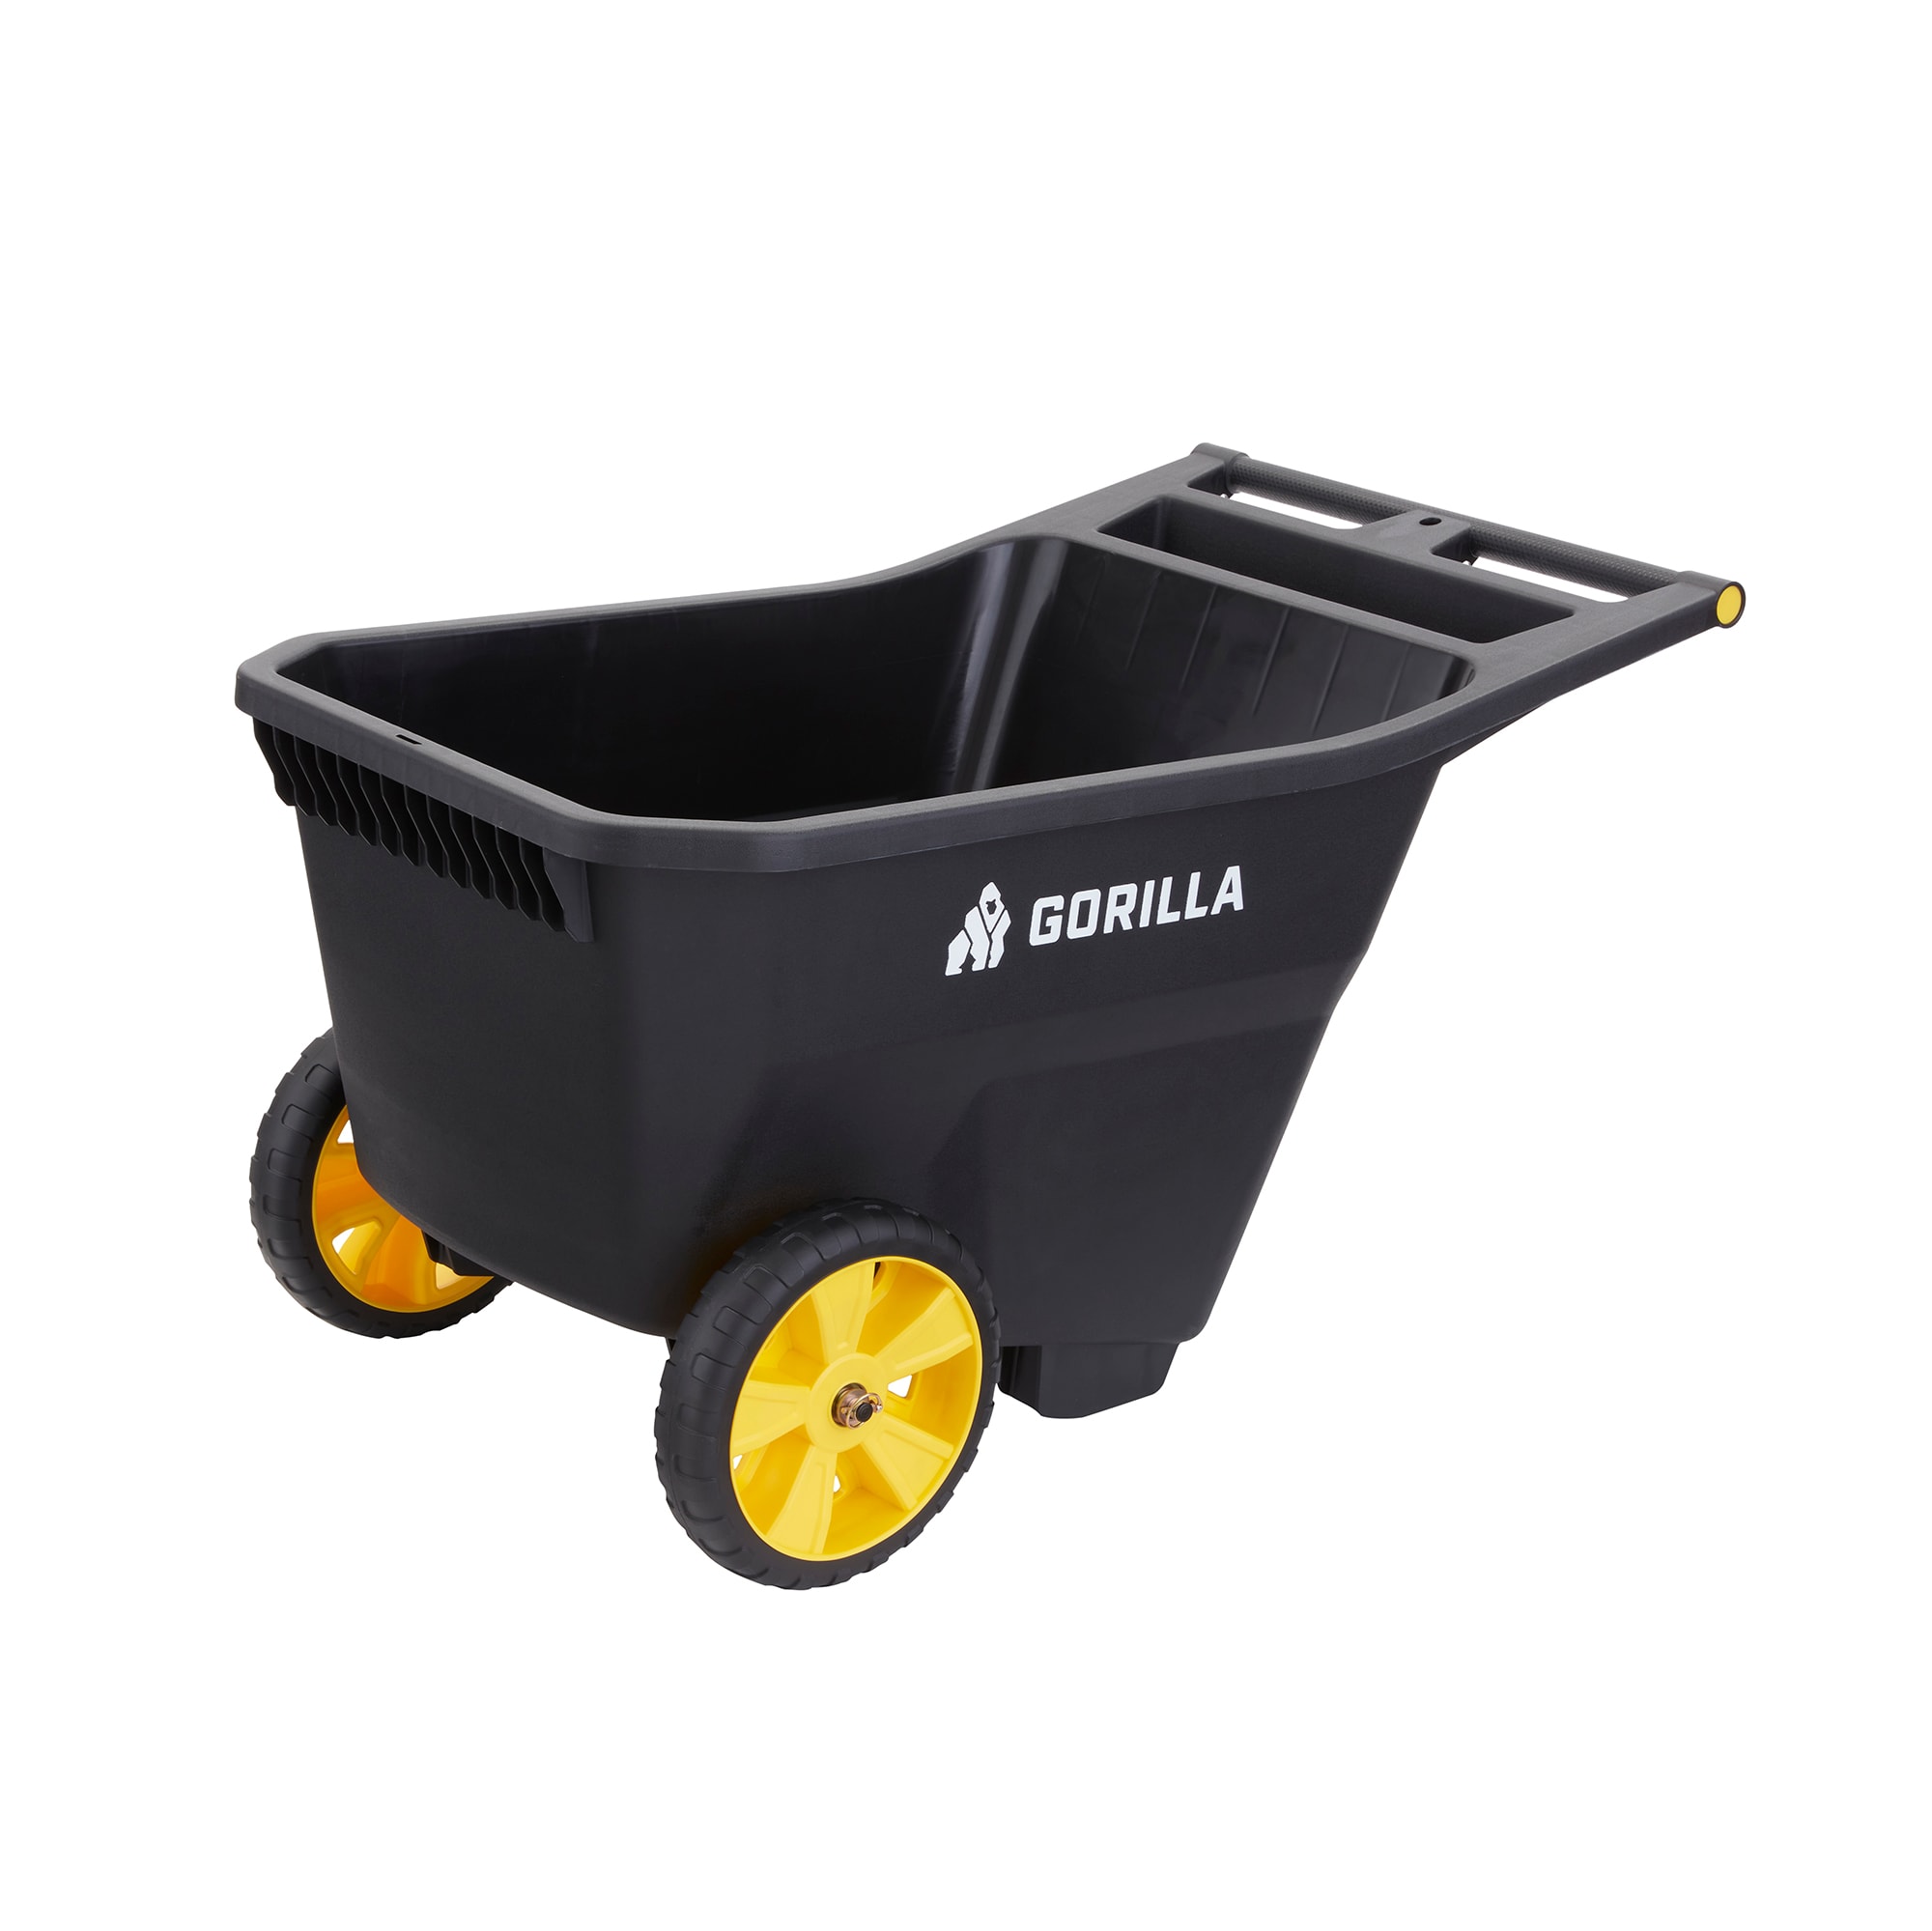 Gorilla Carts Black 8 Cu. ft. Plastic Garden Cart with 600 lbs. Weight Limit and 12-Inch Solid Wheels | GCY-80